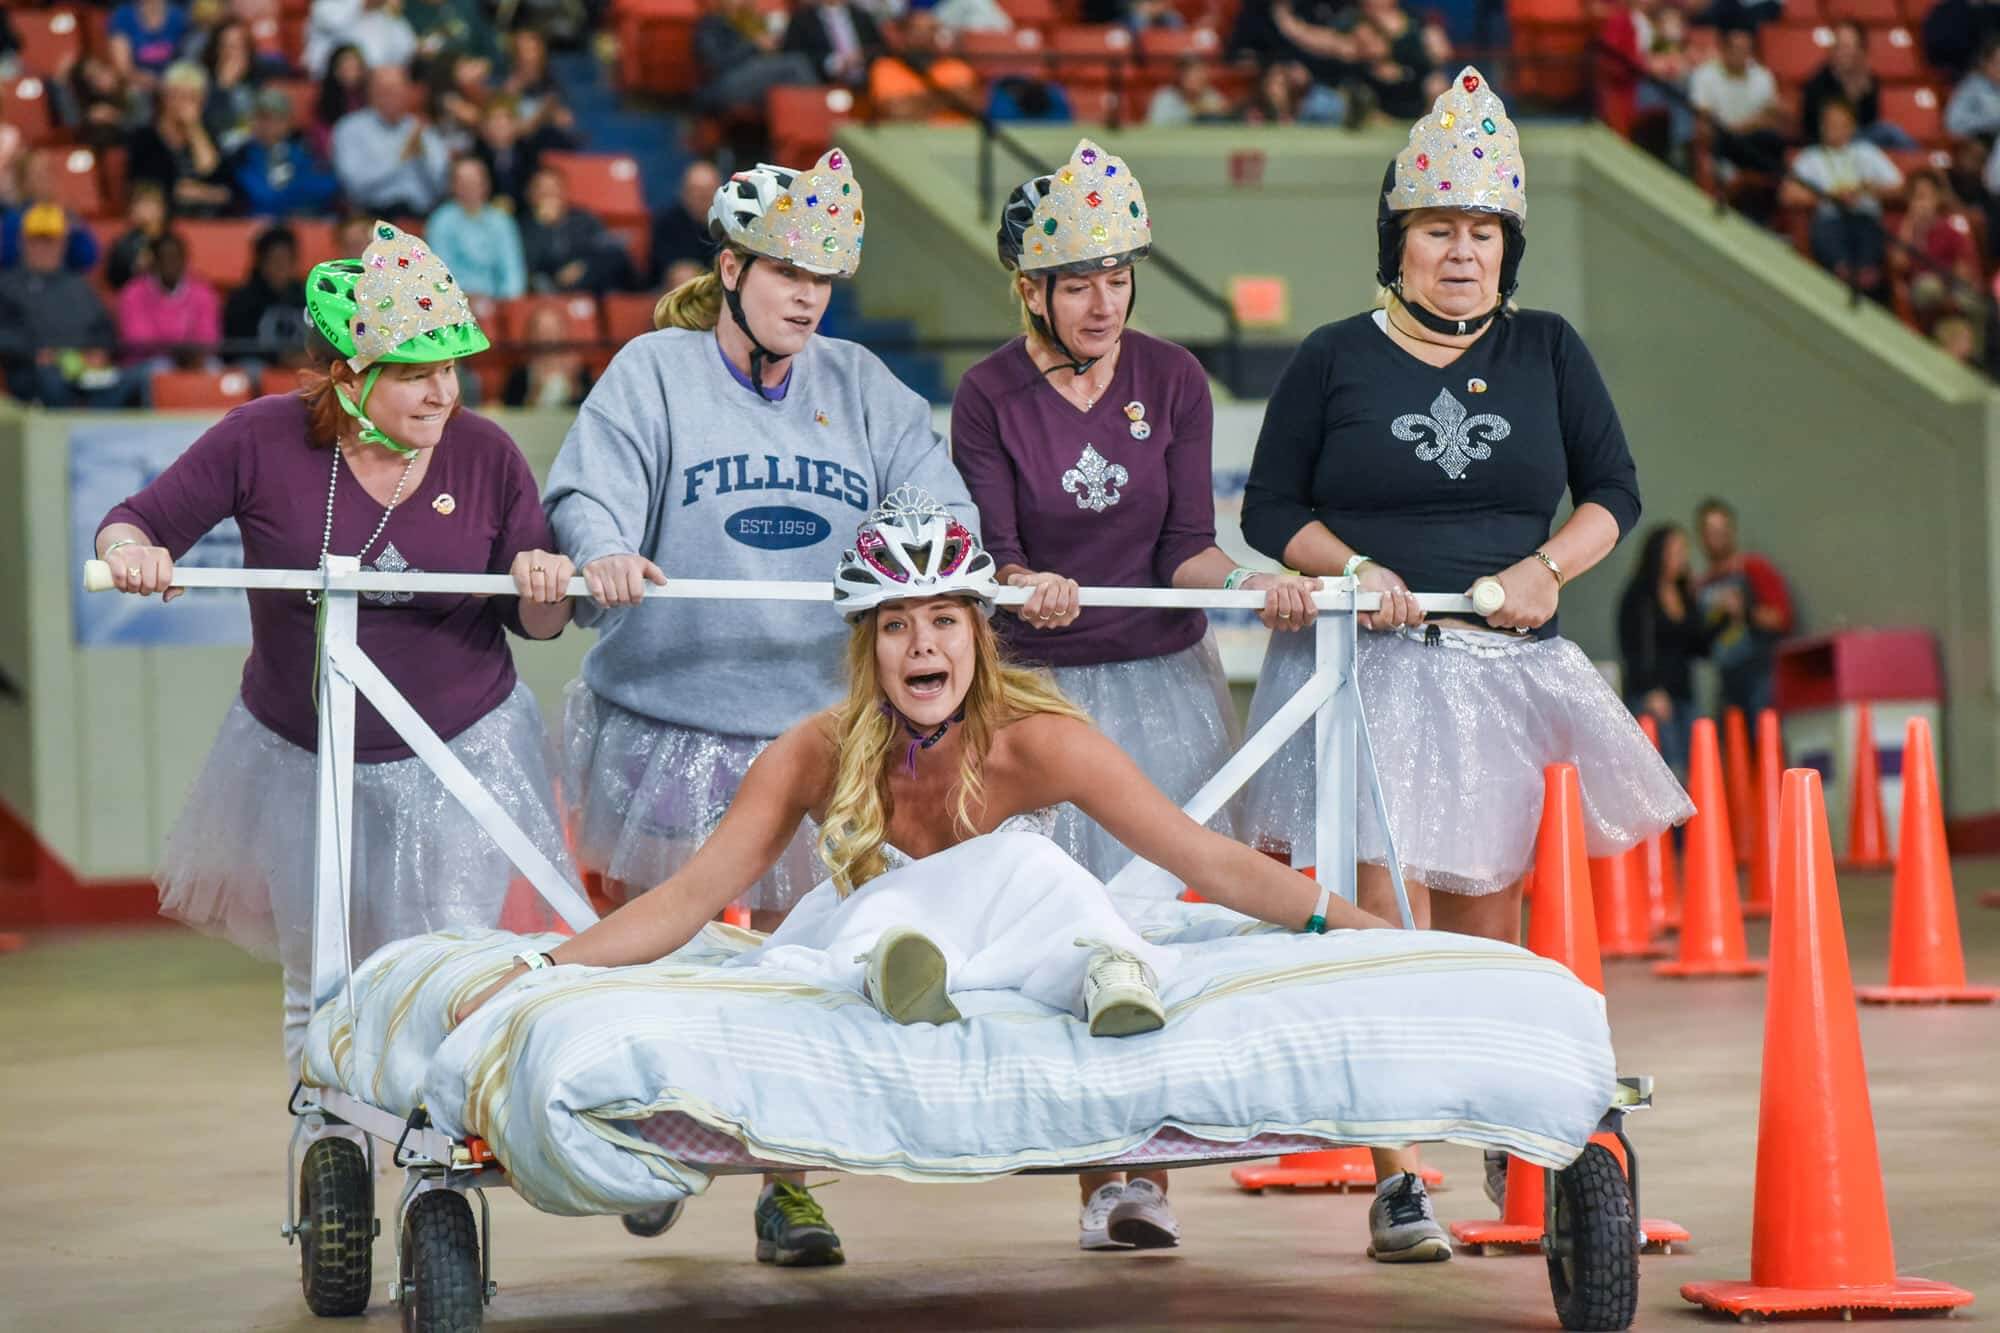 The teams and scene at Kentucky Derby Festival Thorntons Great Bed Races, held Monday, May 1, 2017, at Broadbent Arena in Louisville, Ky.